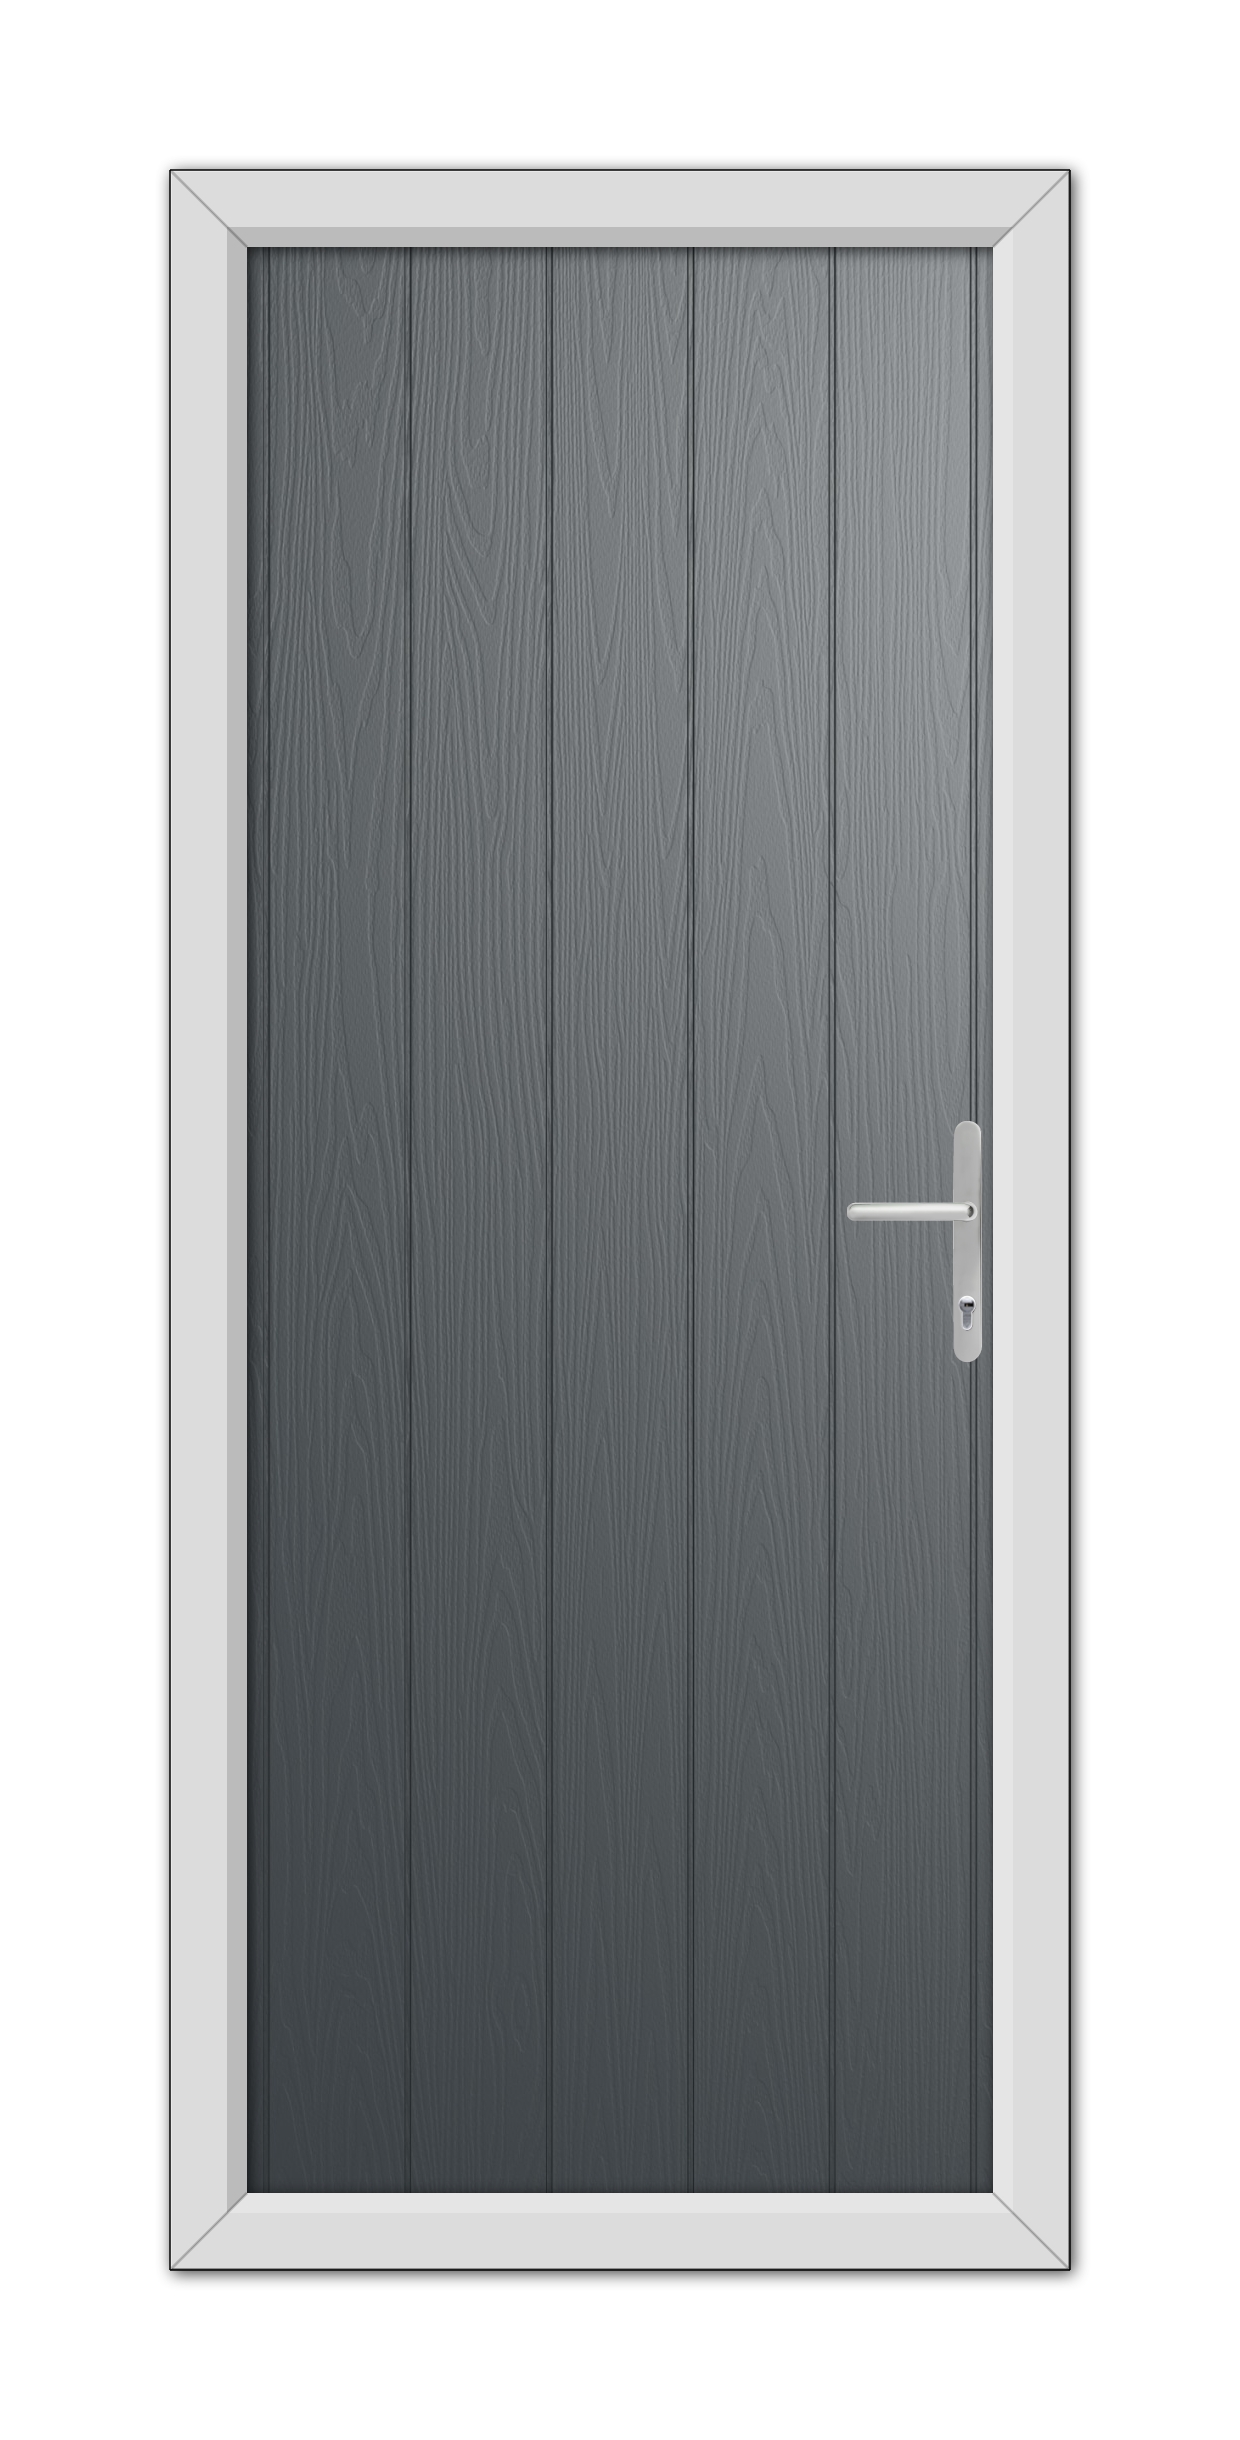 A modern Anthracite Grey Norfolk Solid Composite Door 48mm Timber Core with a silver handle, set within a simple white door frame.